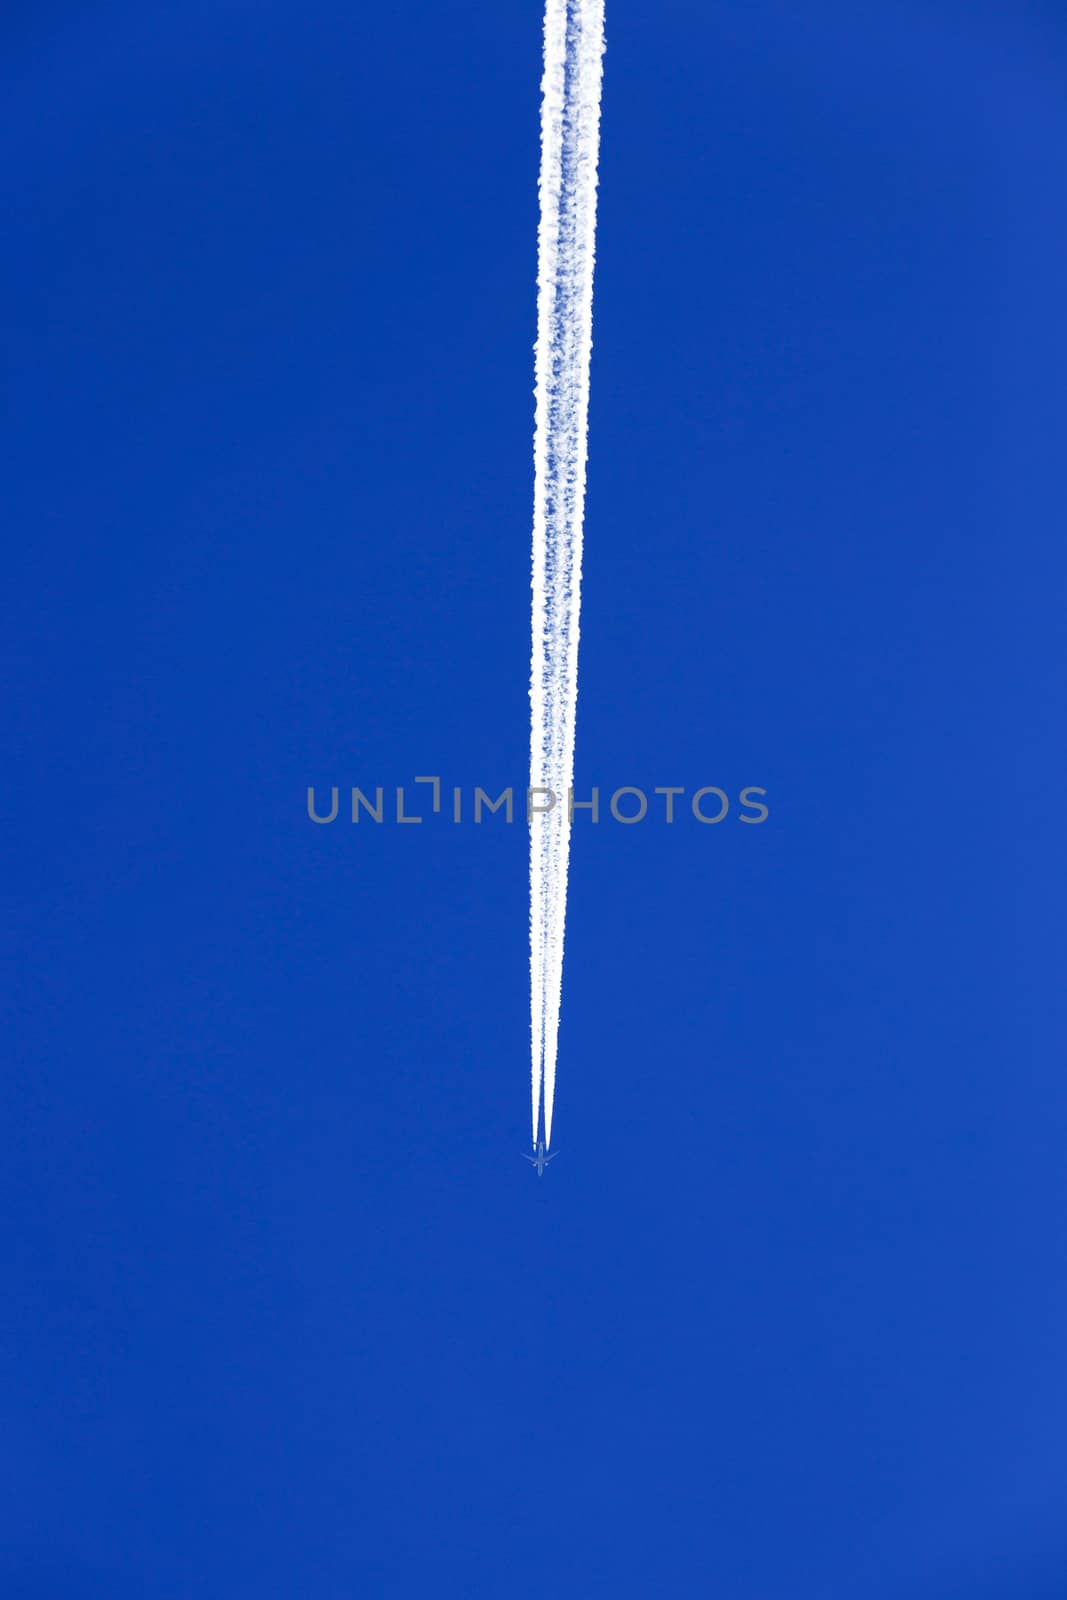   photographed the aircraft during flight in the blue sky